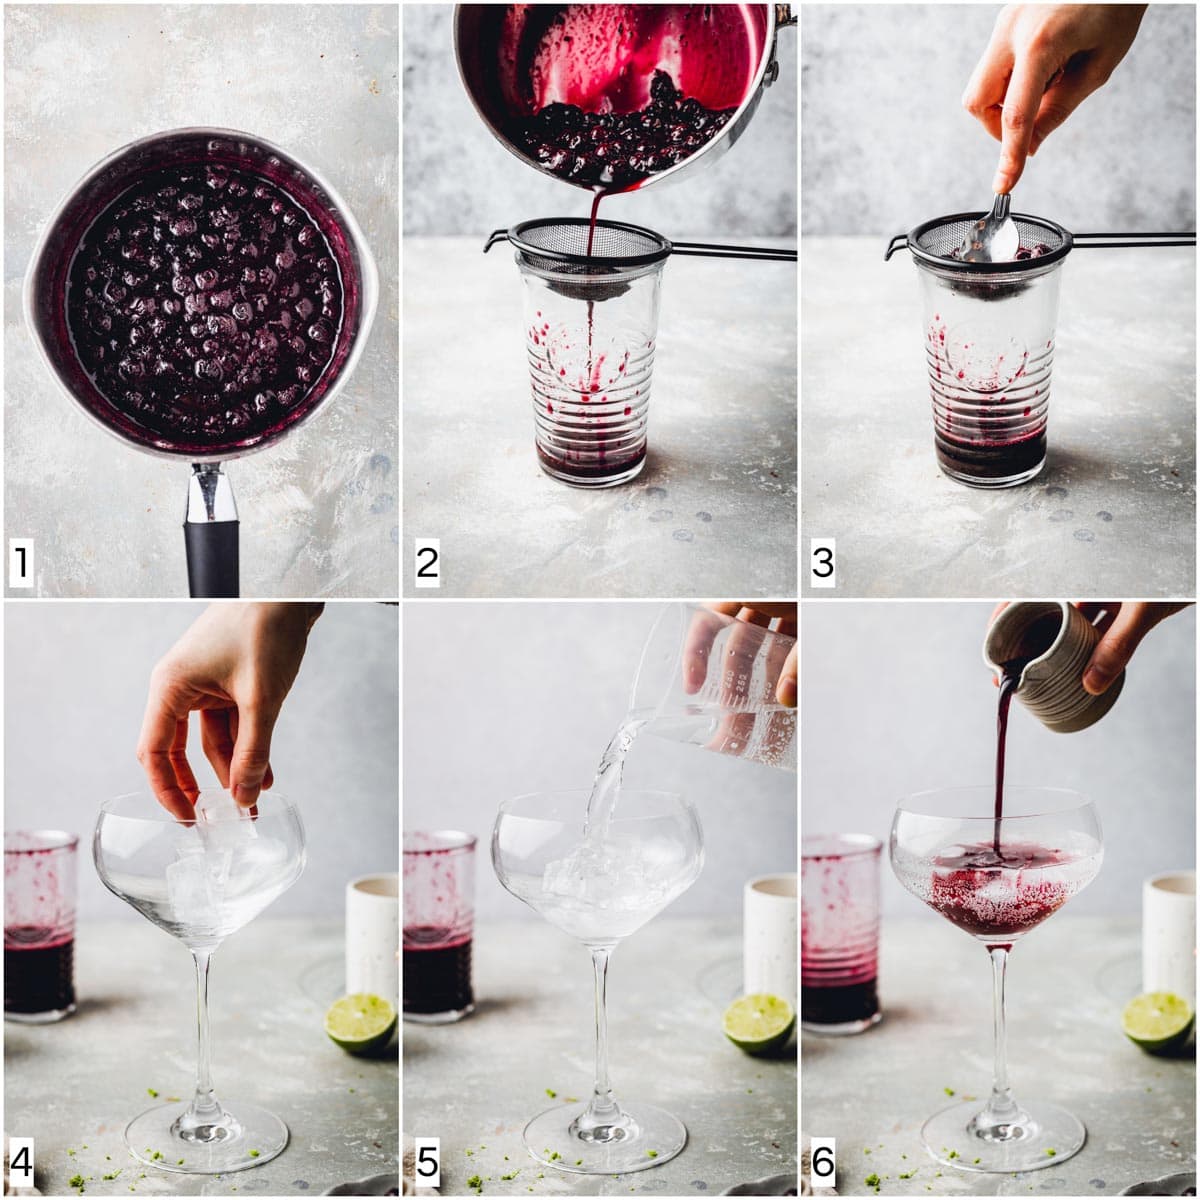 A collage of six images showing six steps in the making of blueberry cocktail. 